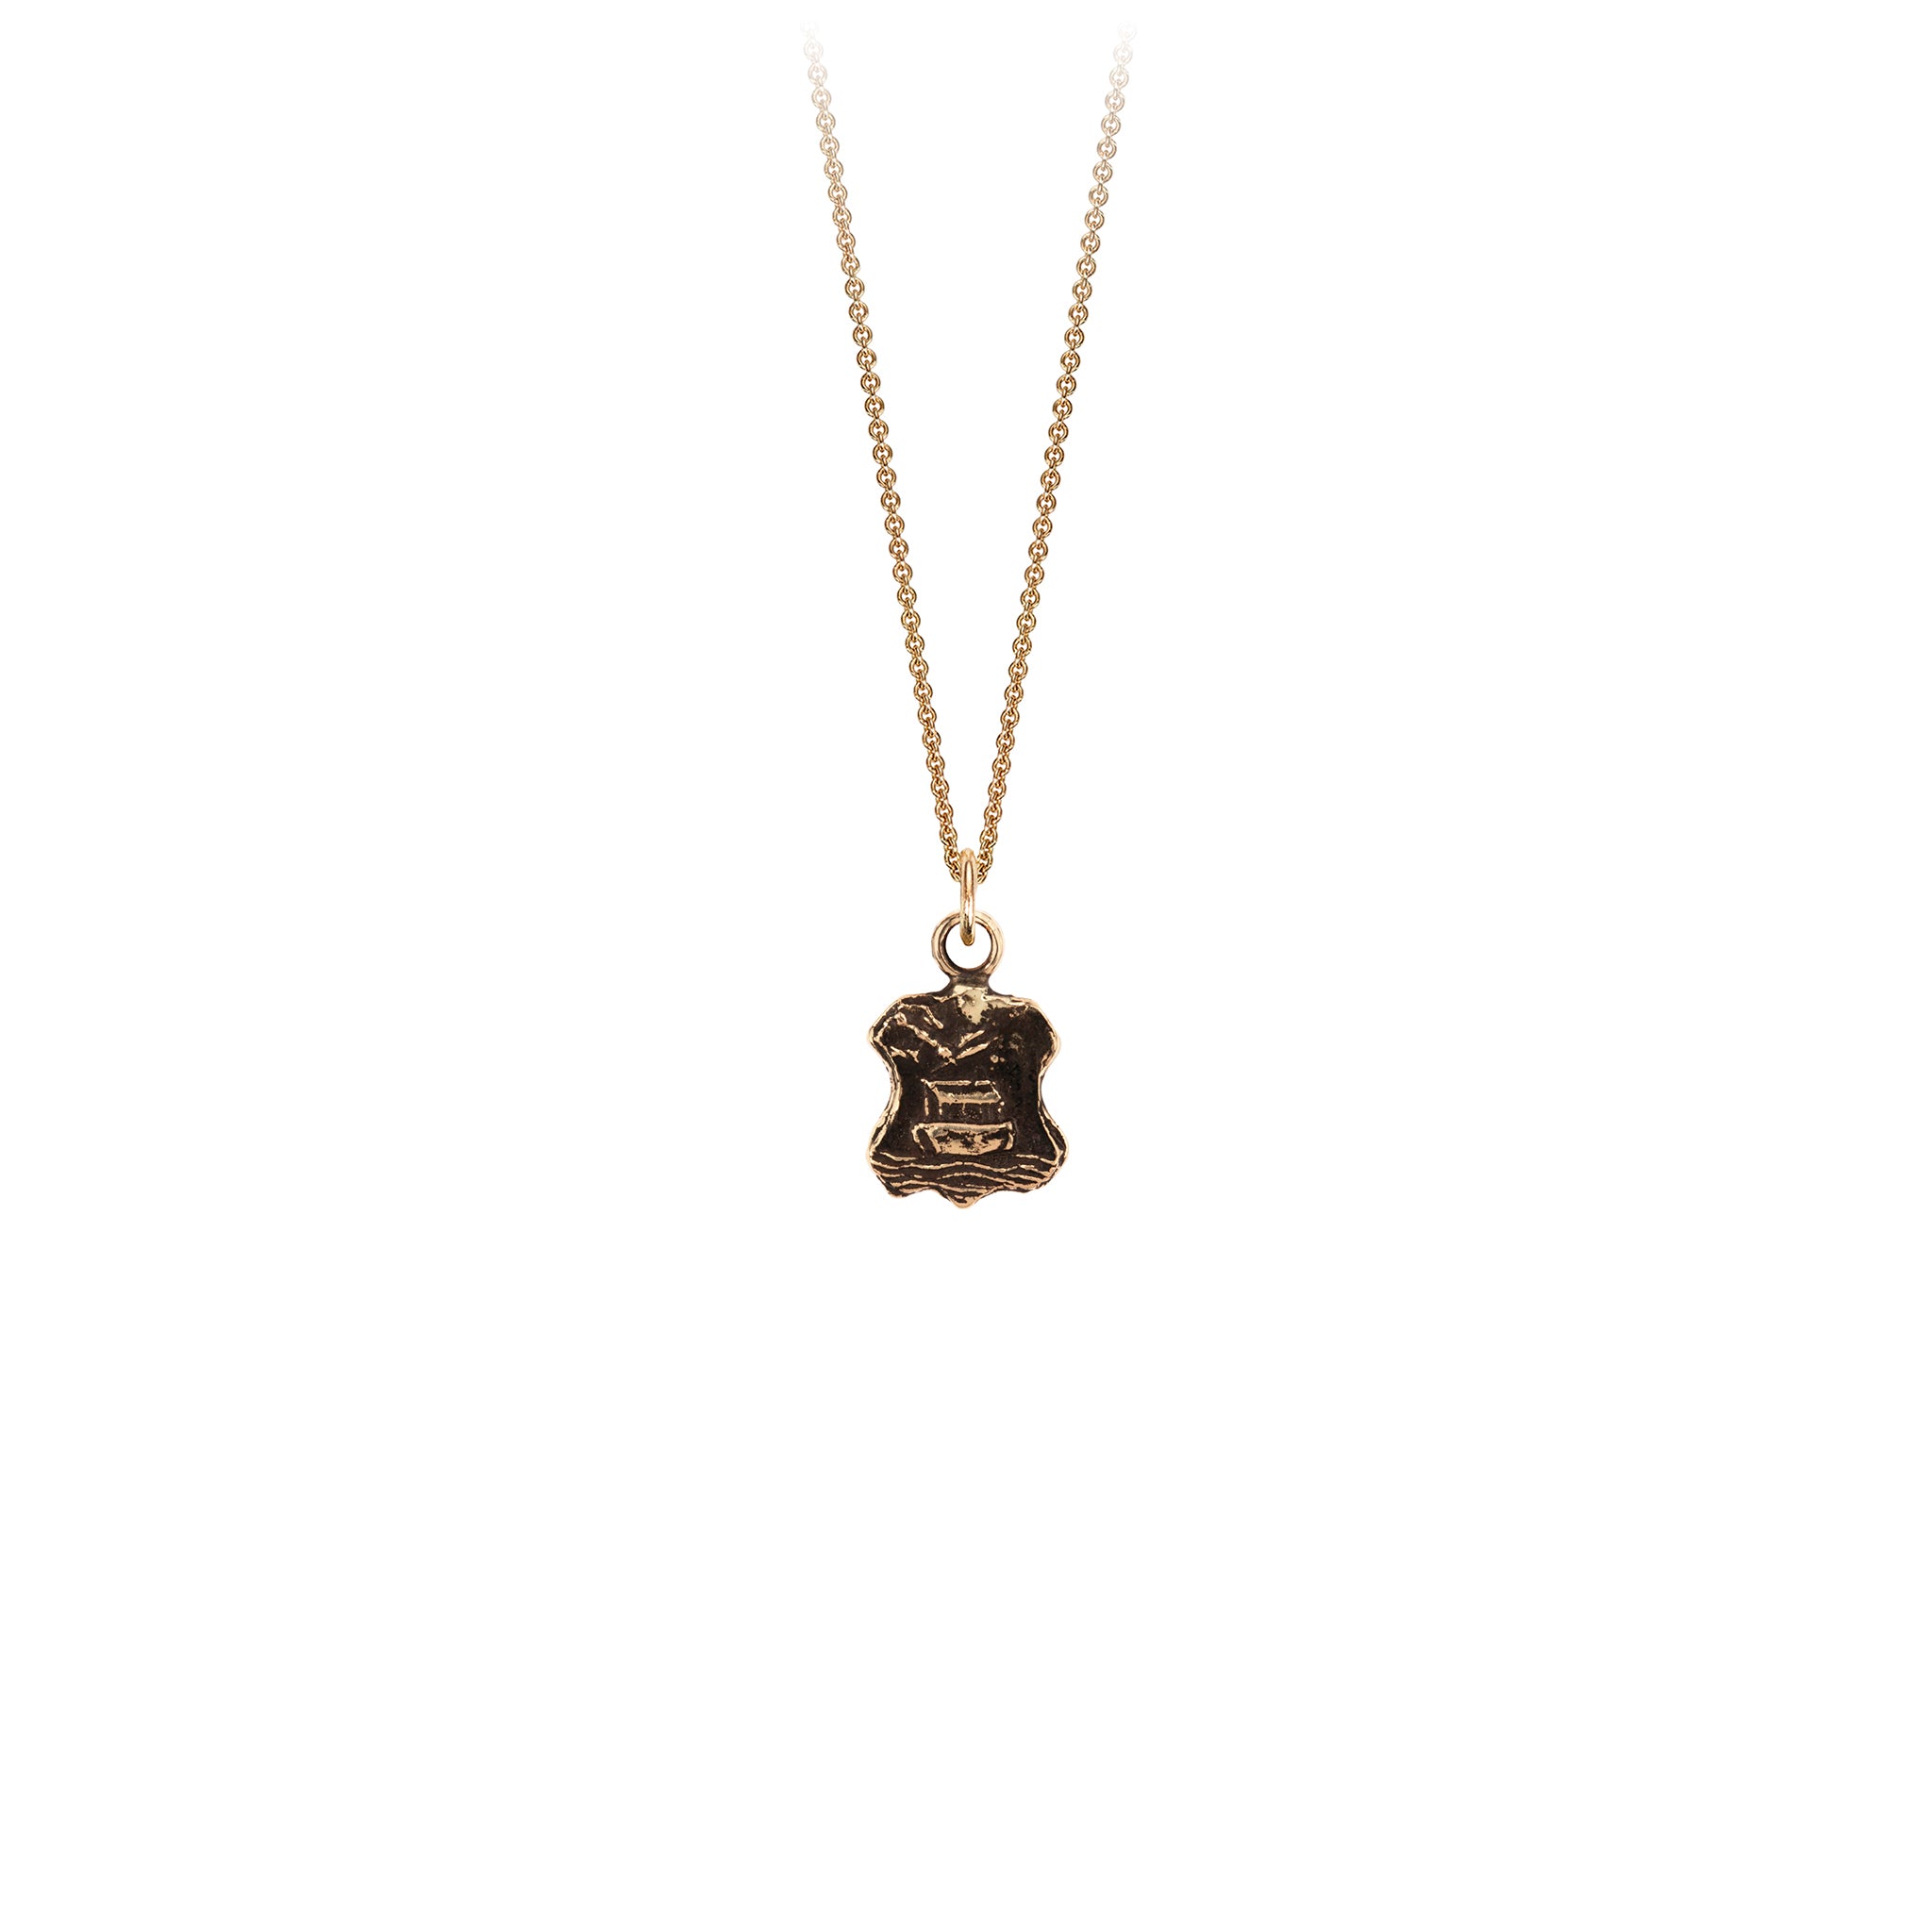 A 14k gold chain with our 14k gold Have Faith talisman.